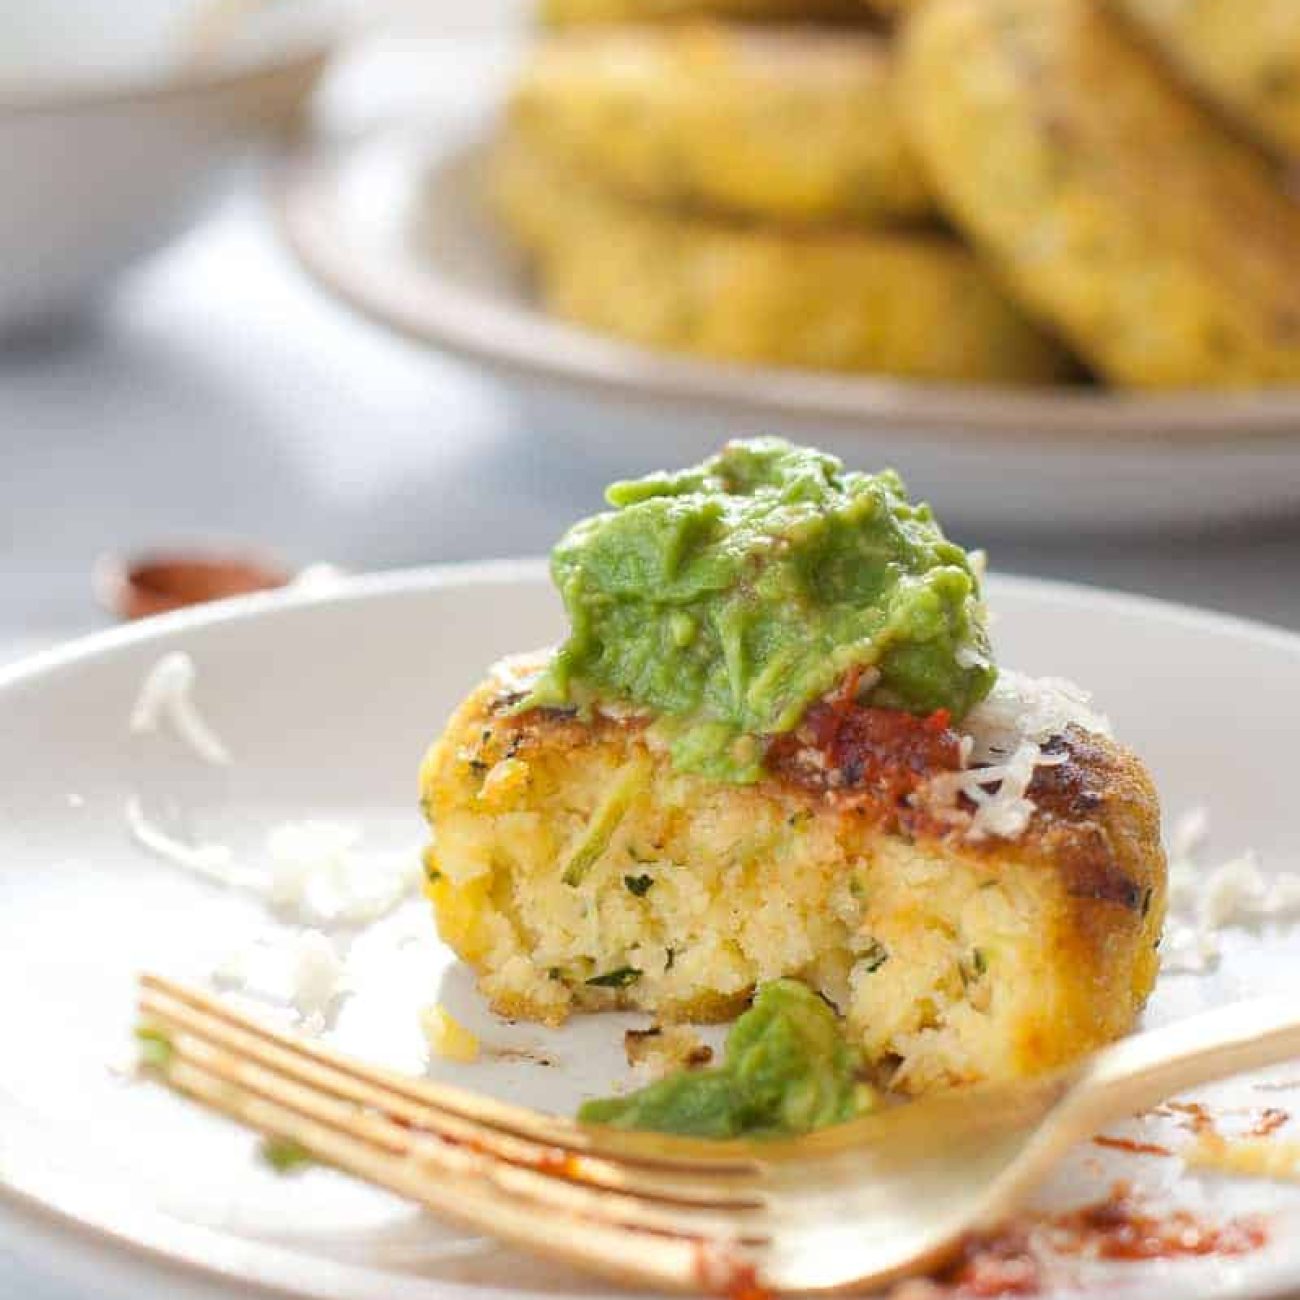 Grilled Arepas With Salsa South American Corn